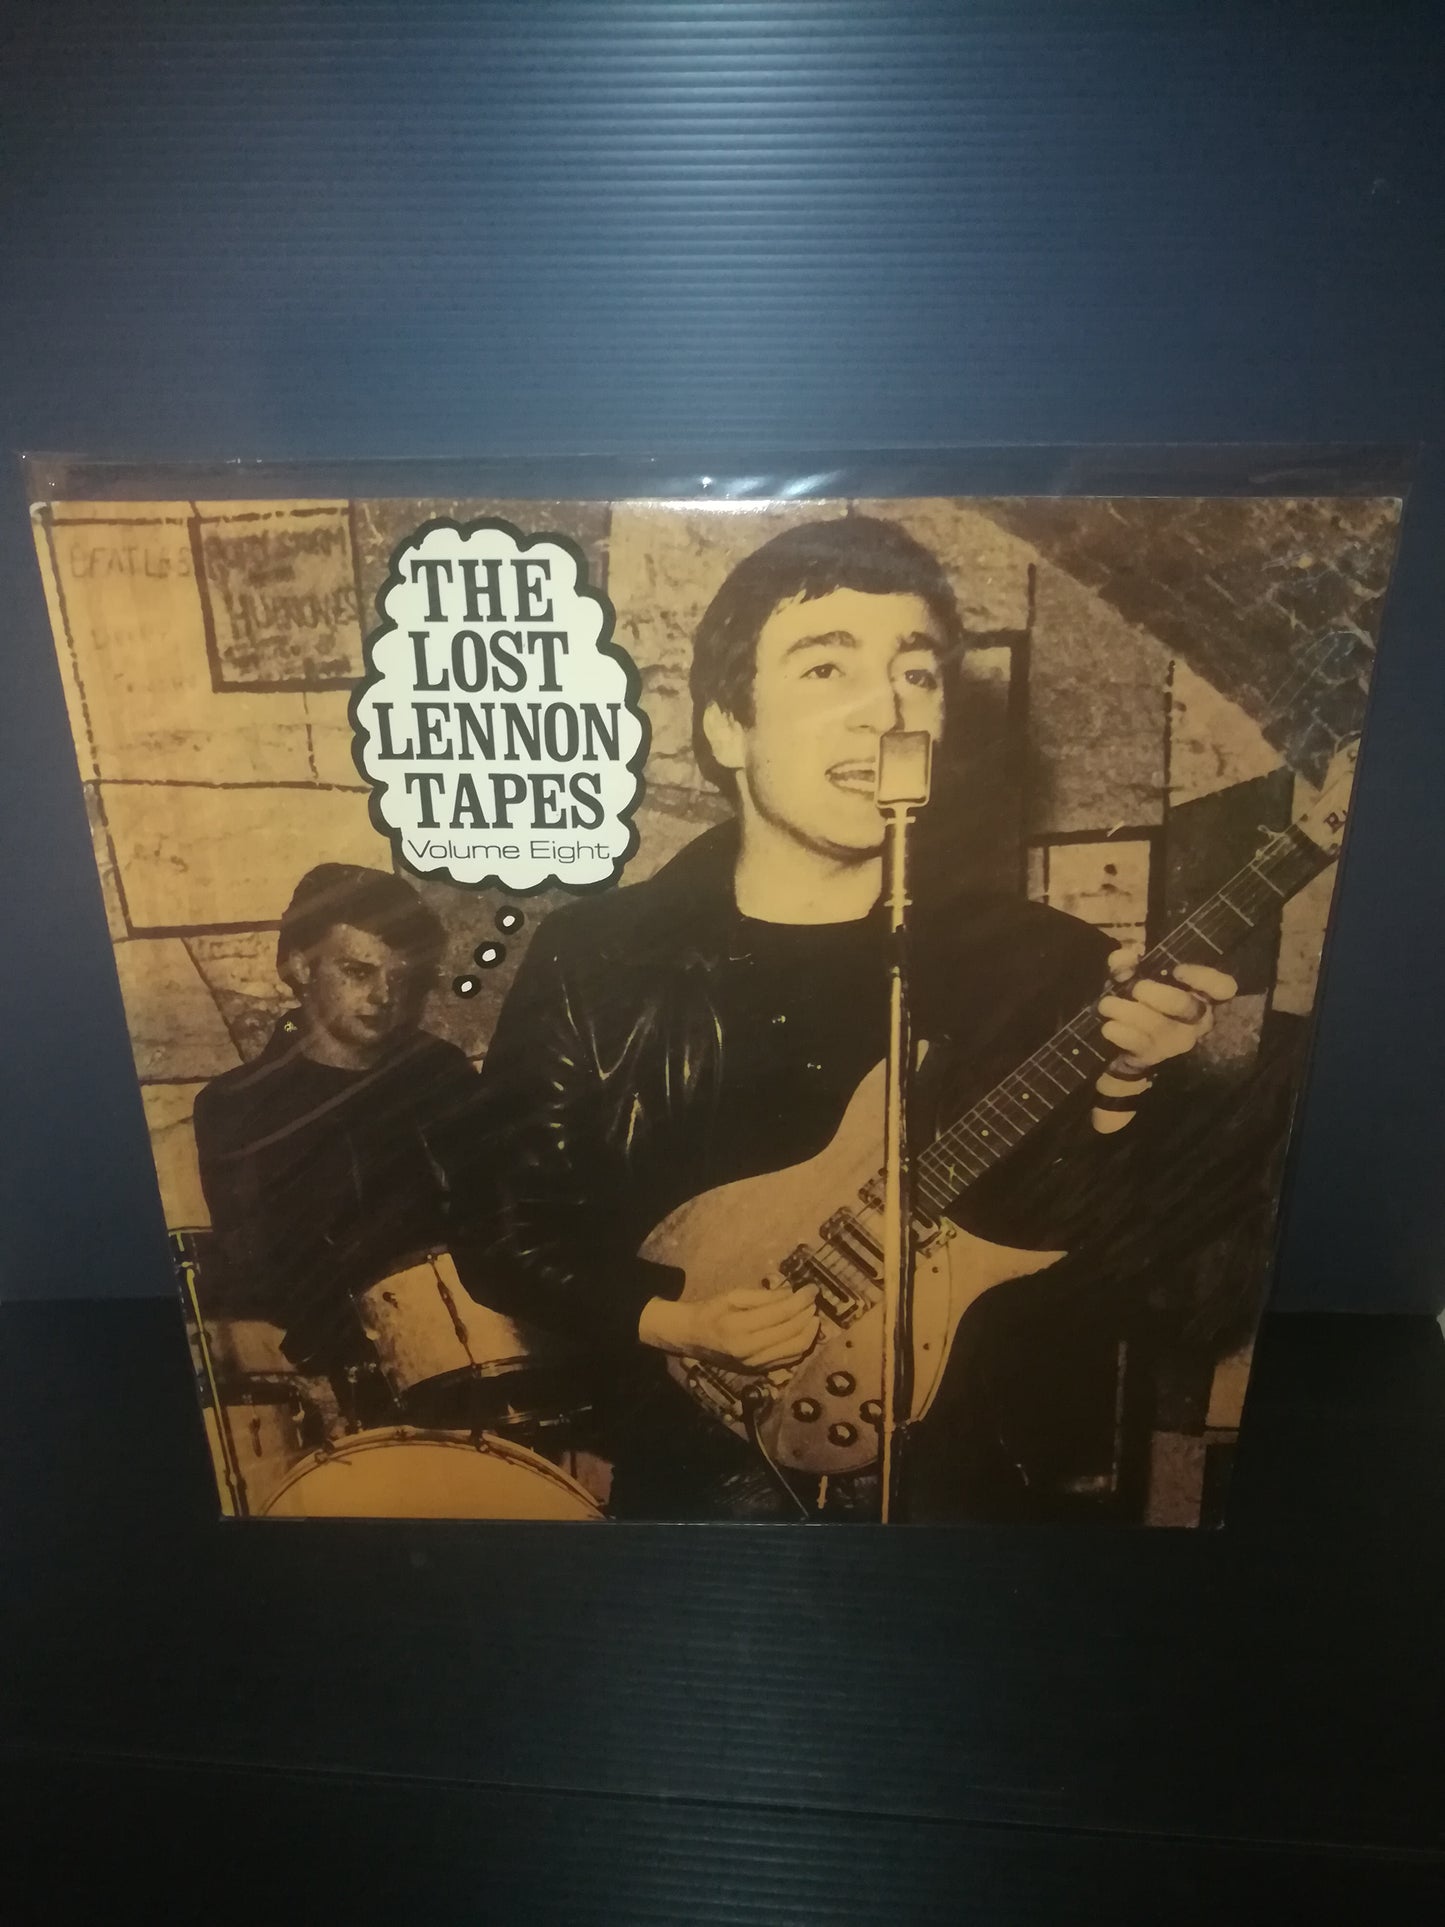 The Lost Lennon Tapes Volume Eight